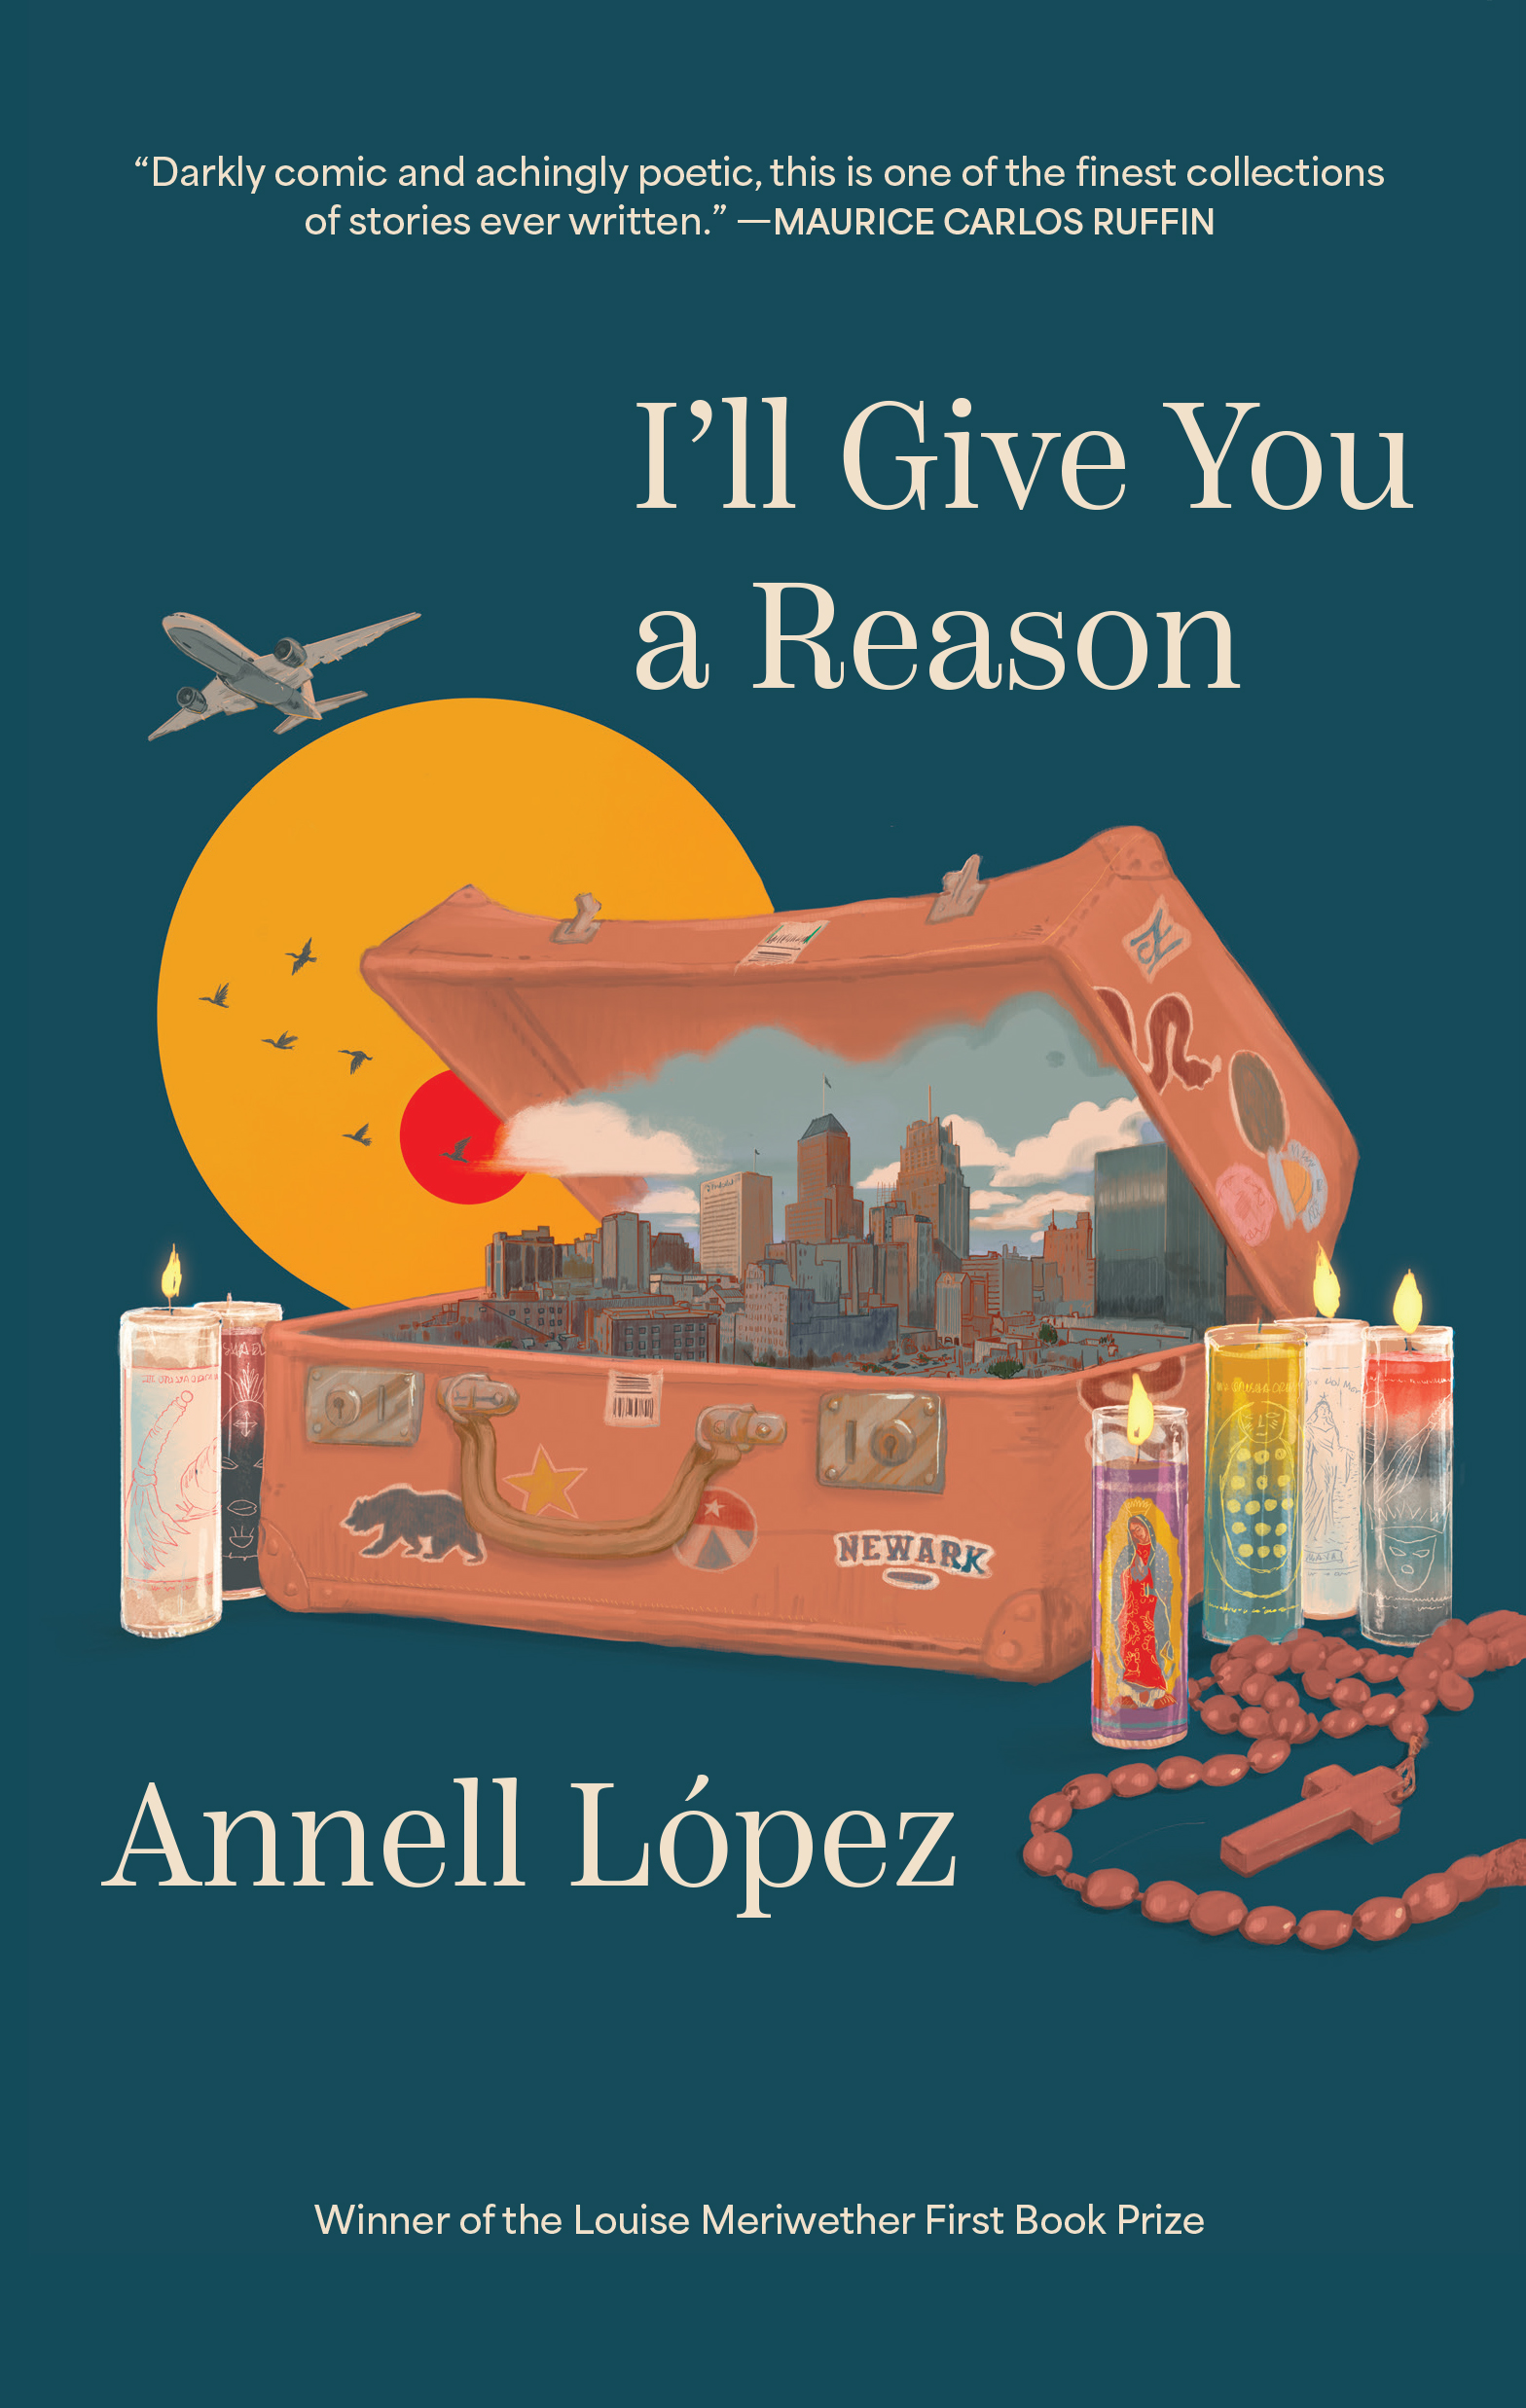 cover of i'll give you a reason. dark blue cover, with a toolbox that contains a drawing of a city landscape inside